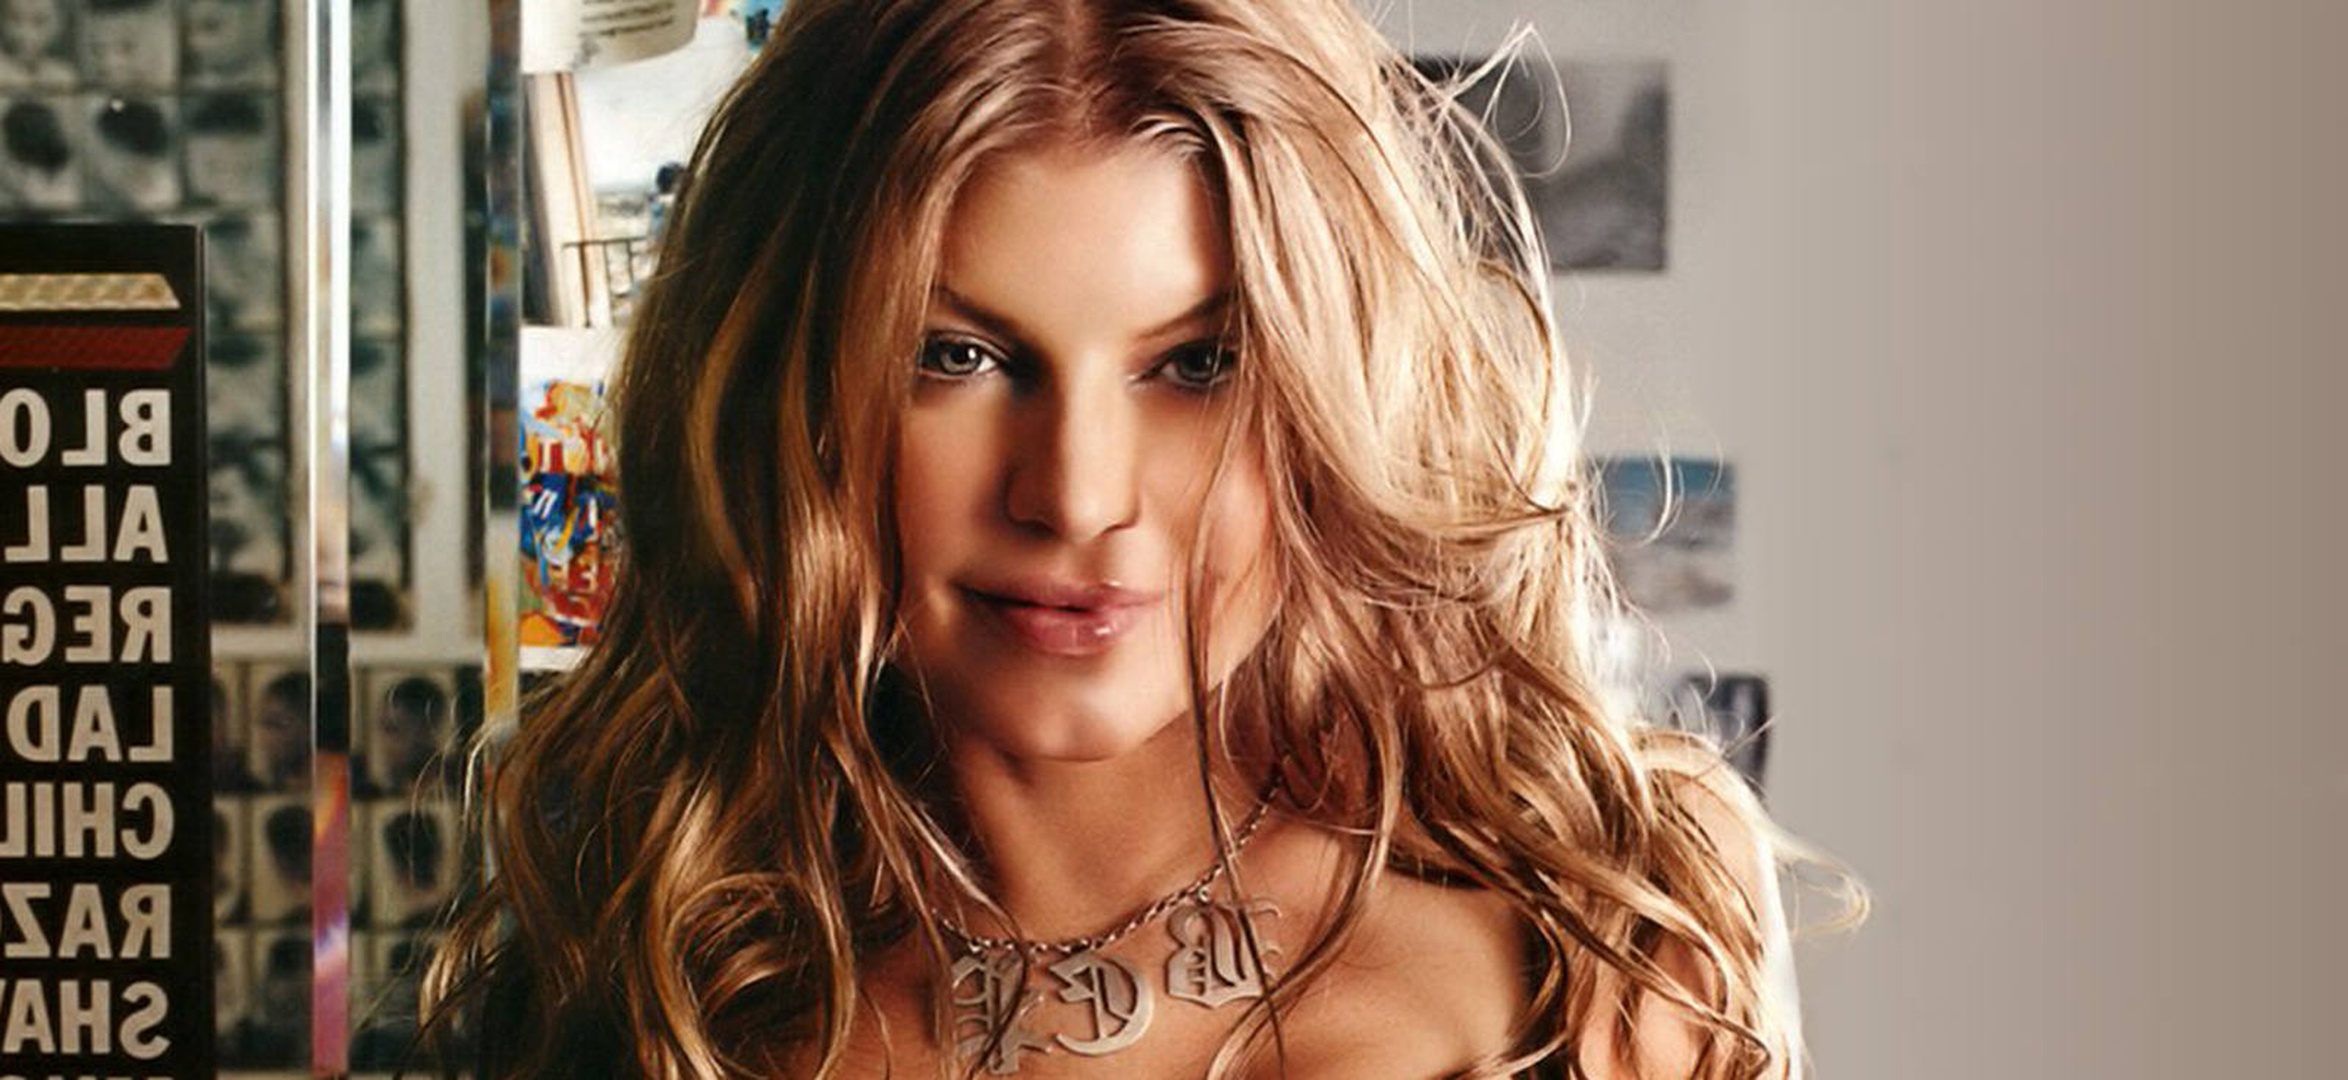 Fergie: "Glamorous" was released as the third single on February 20, 2007. 2350x1080 Dual Screen Background.